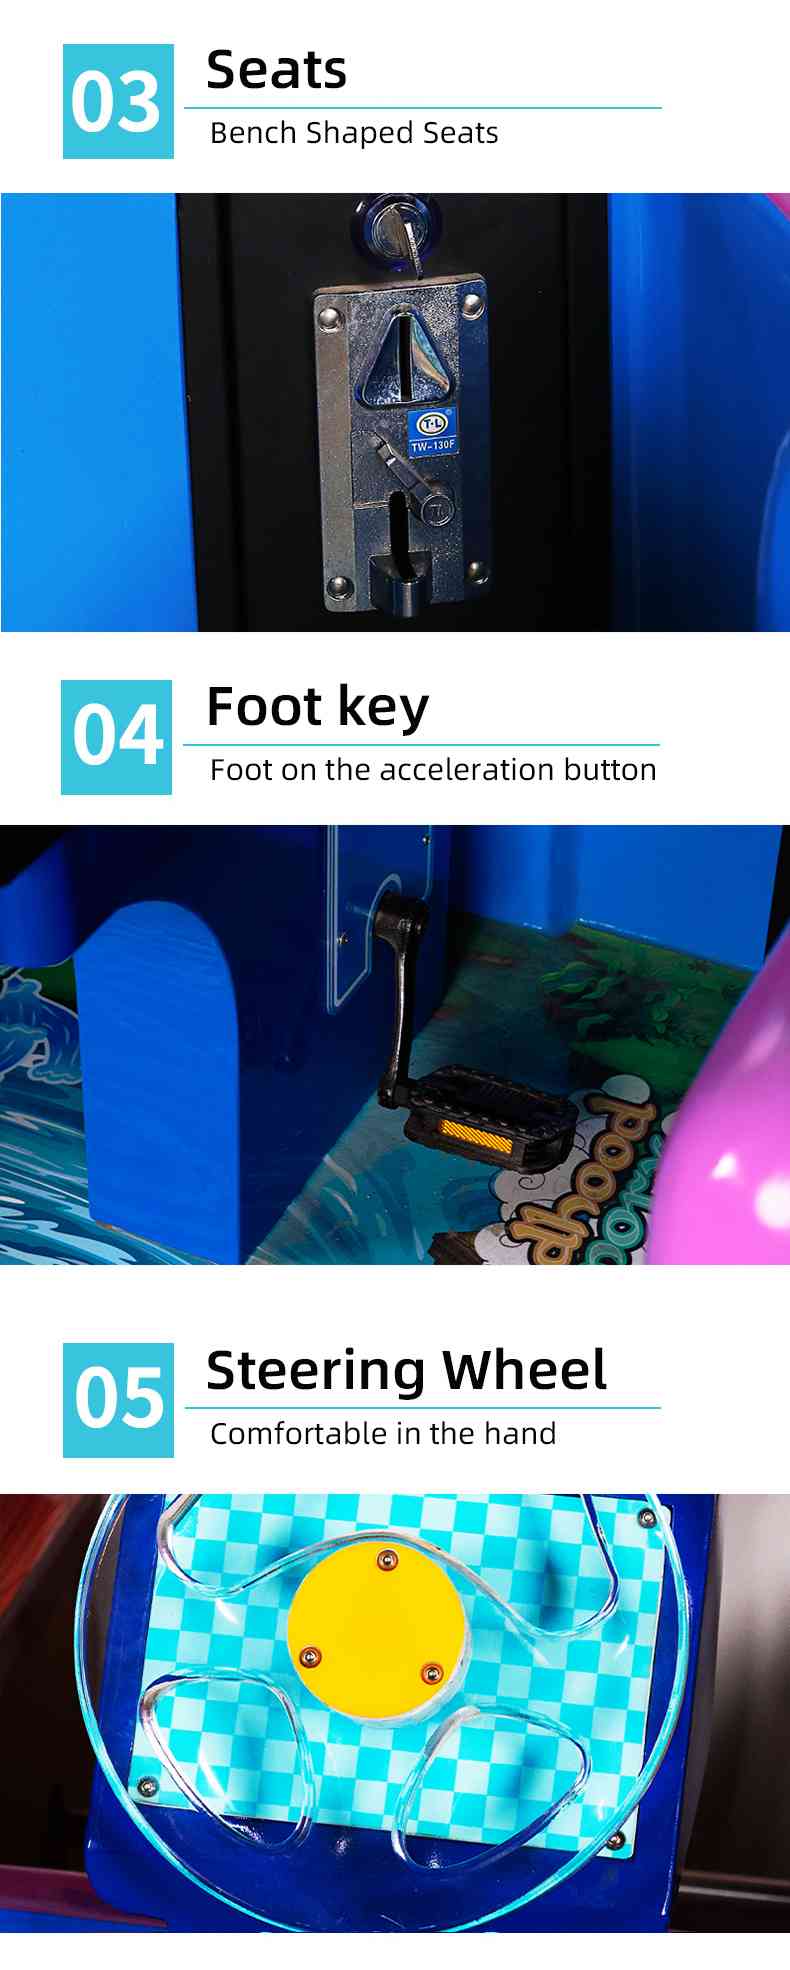 This image shows some details of the coin slot, pedals, steering wheel of the bicycle racing game machine